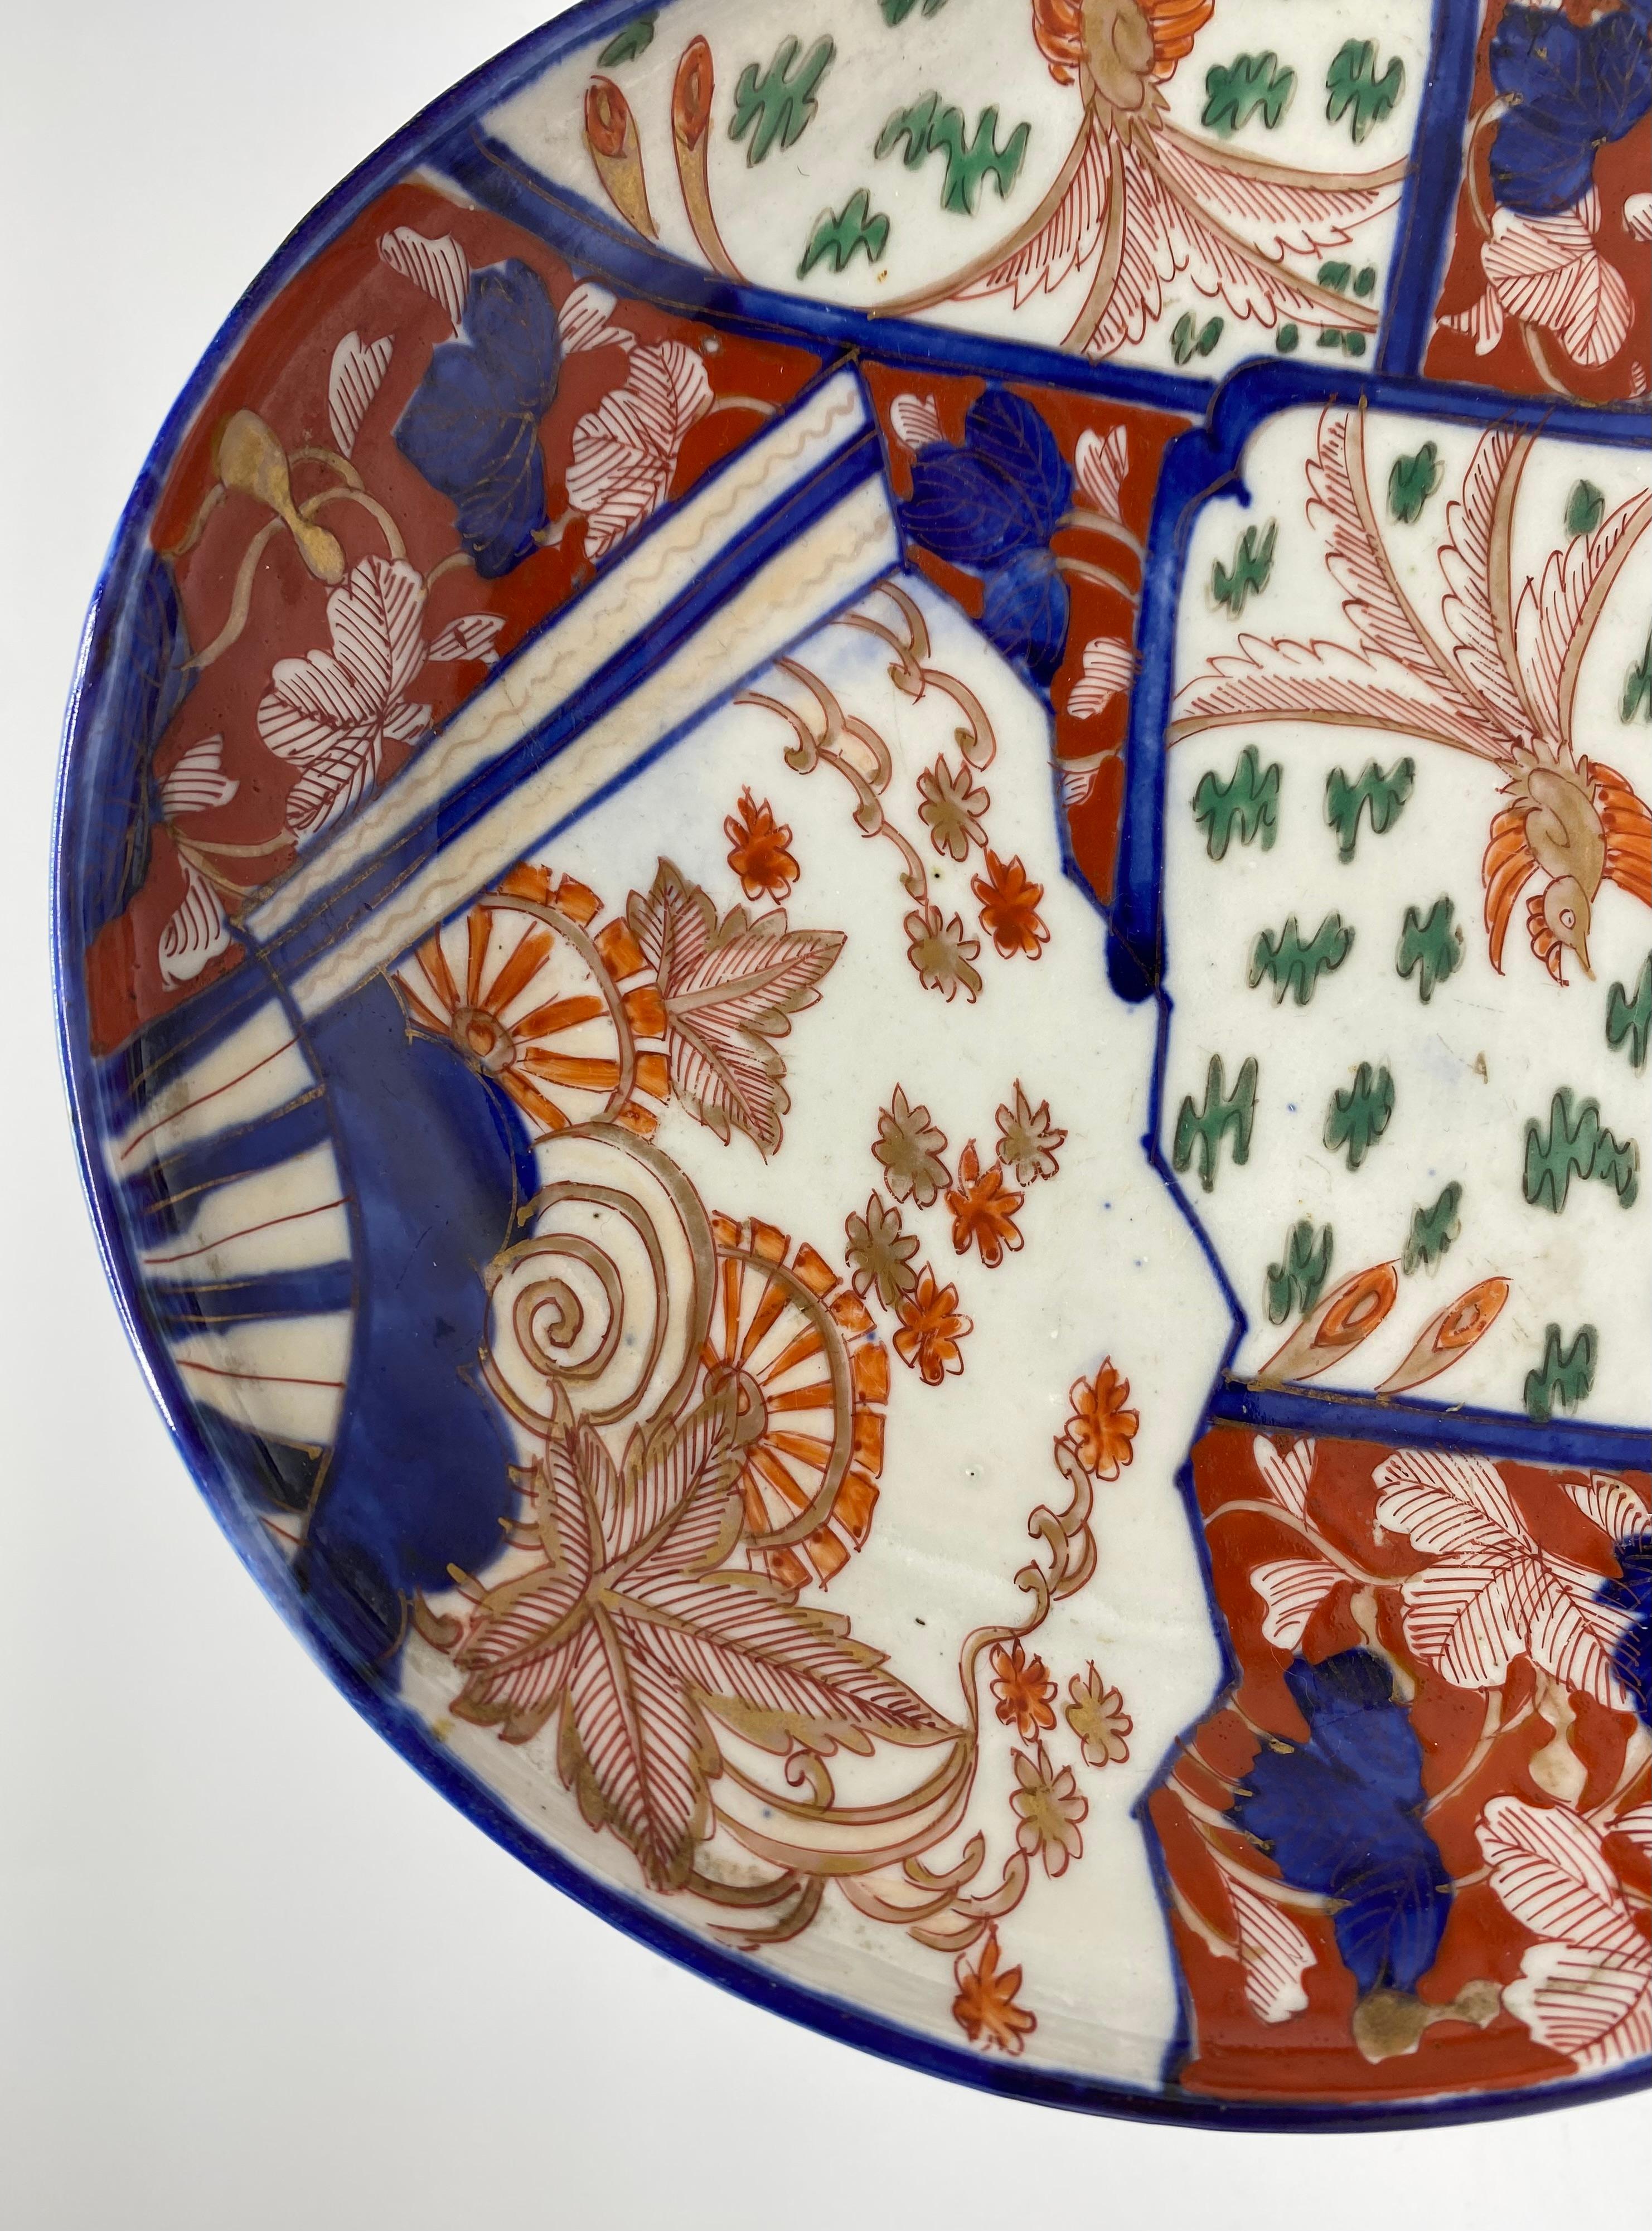 Imari porcelain gourd shaped dish, Arita, Japan, c. 1890, Meiji Period. The unusual gourd shaped dish, hand painted in typical Imari colours, with panels of birds flying amongst plants, and a fan shaped panel of plants. All on an iron red ground